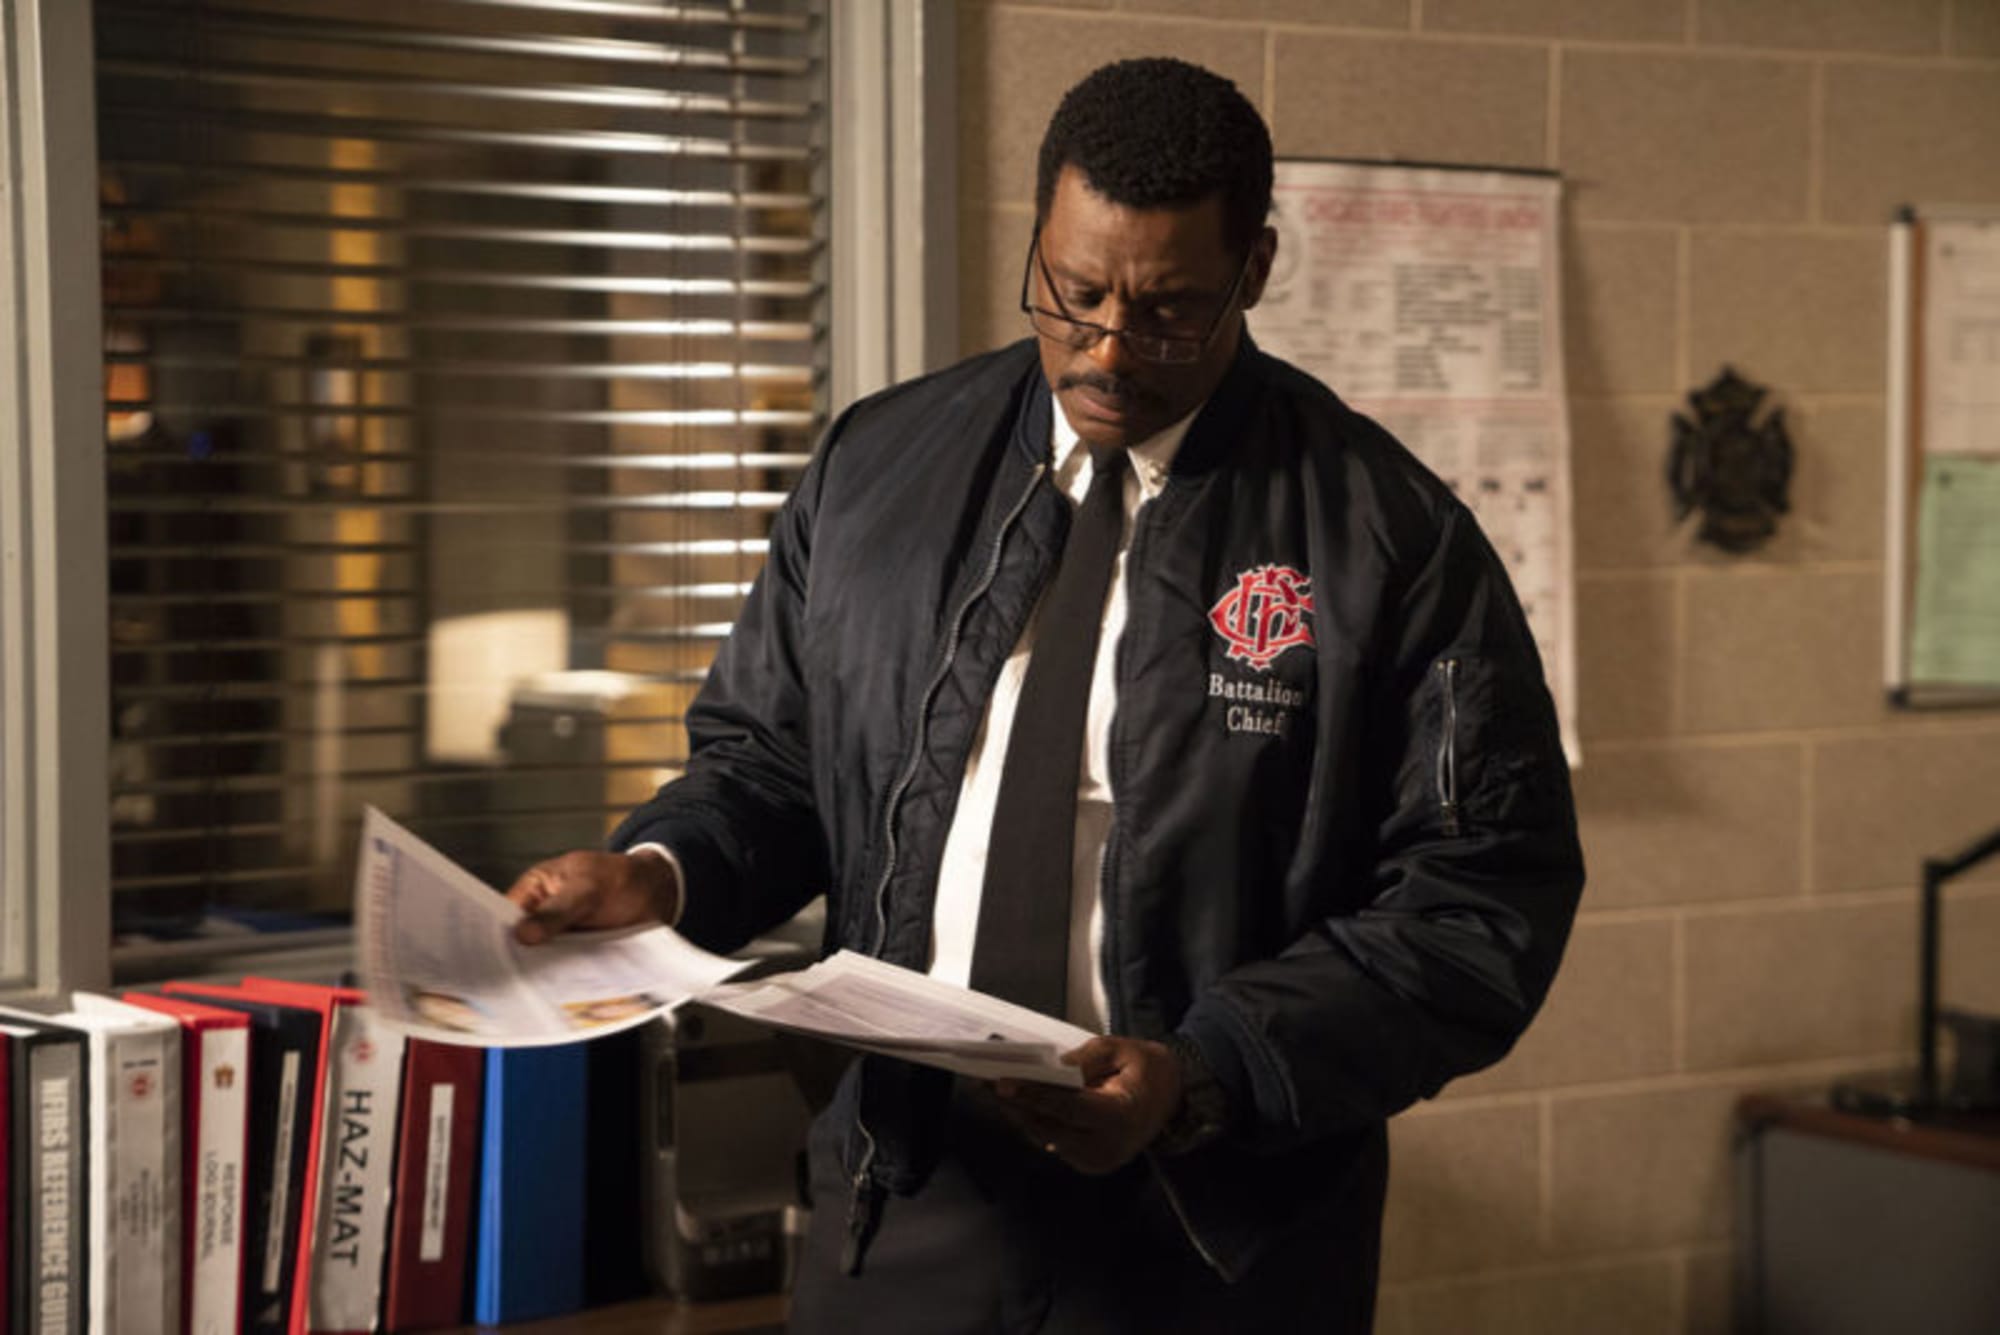 Chicago Fire season 8 A closer look at the Chicago Fire schedule